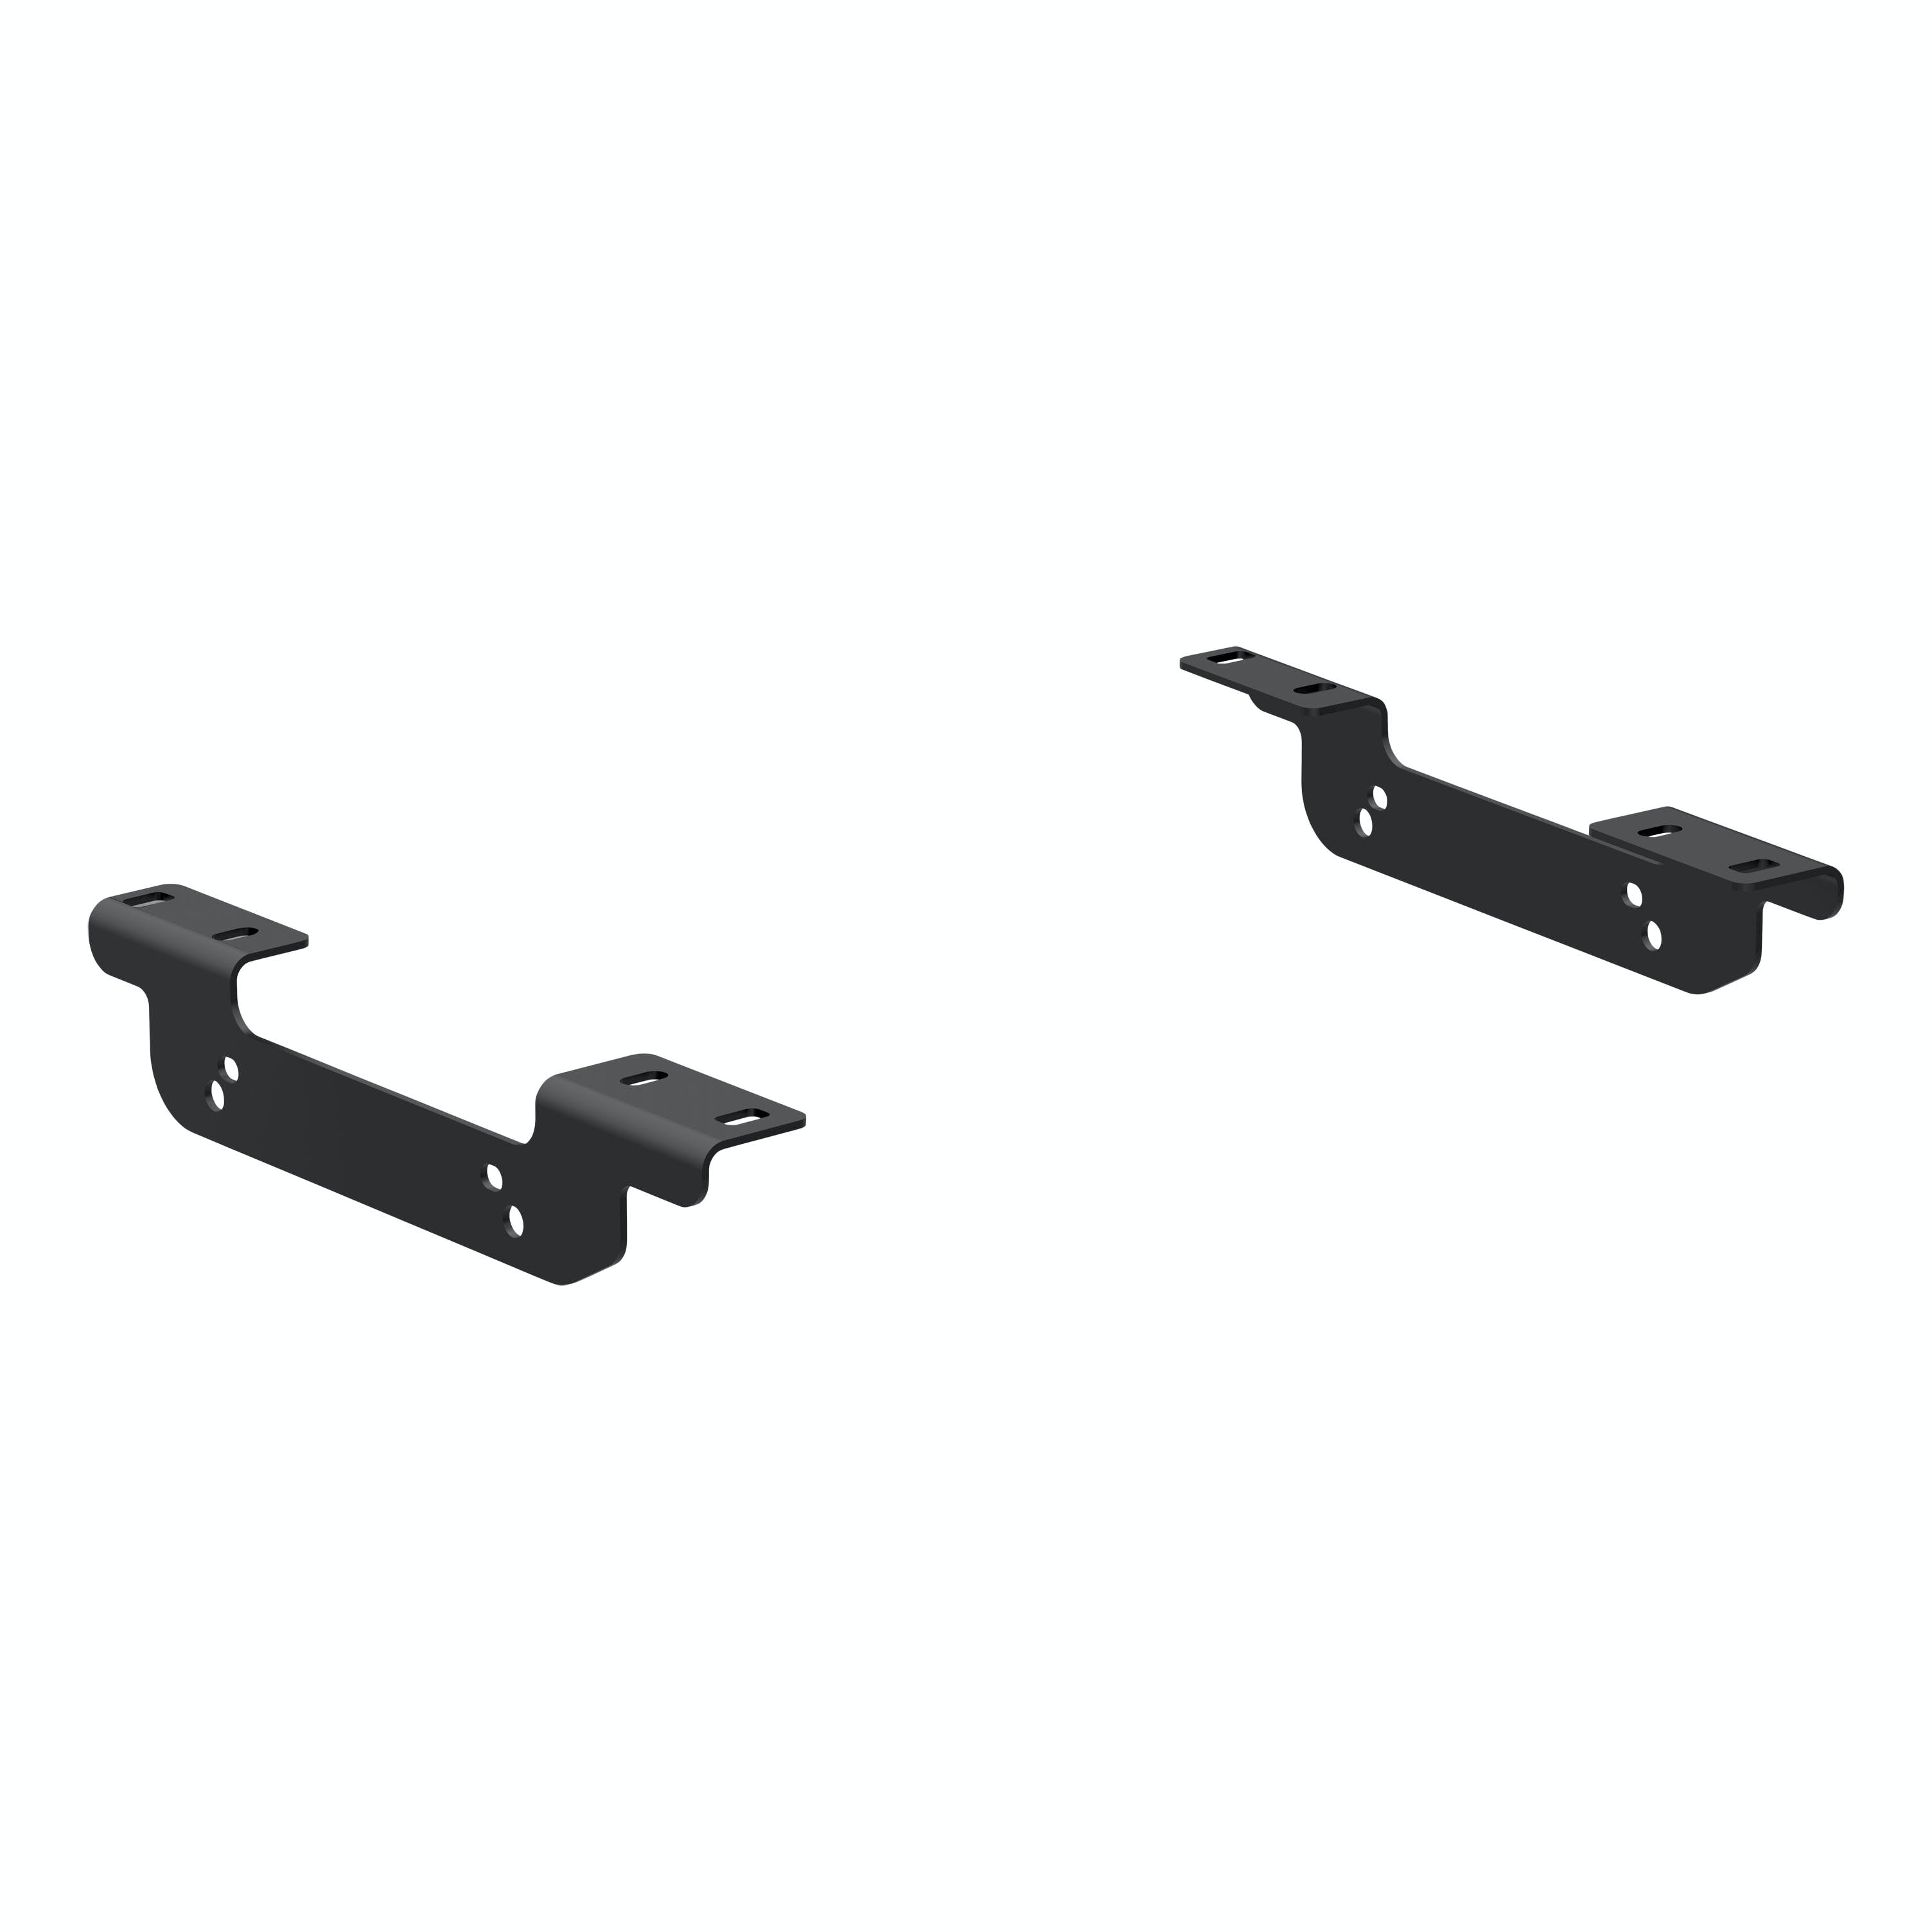 CURT 16411 Custom 5th Wheel Brackets, Select Silverado, Sierra (Except Cab and Chassis)